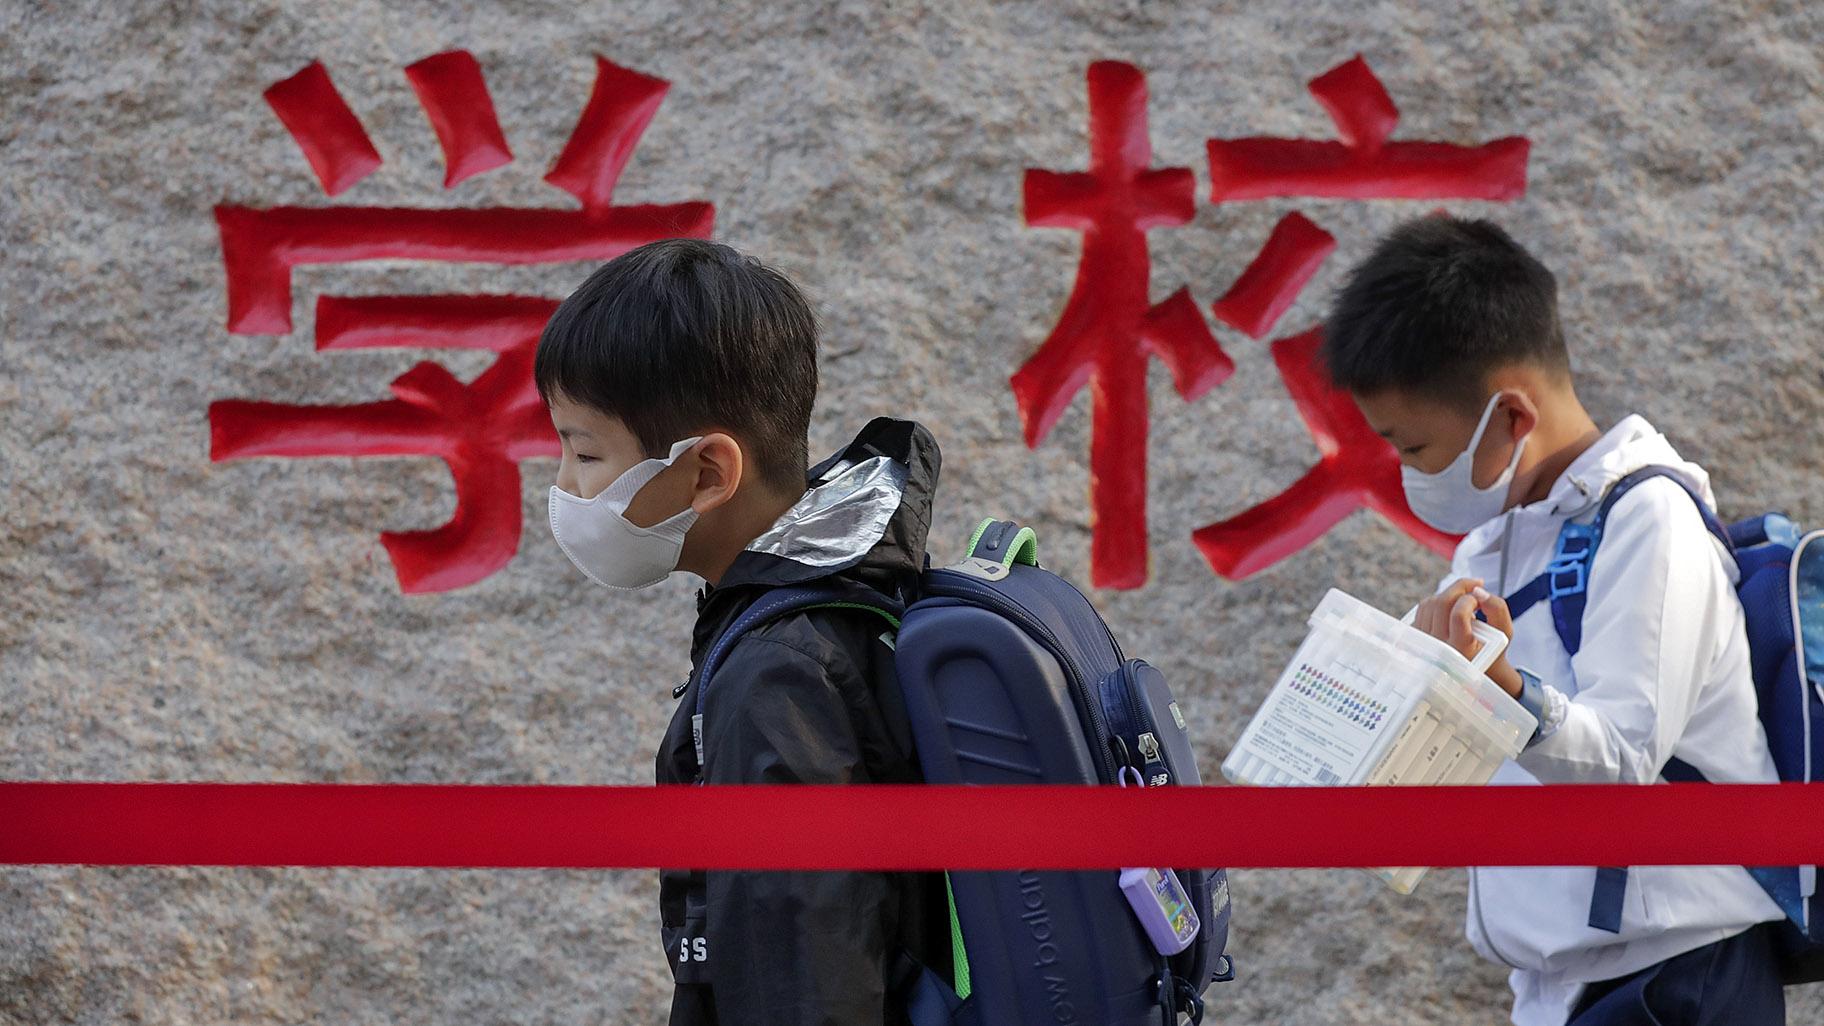 In this Sept. 7, 2020 file photo, students wearing face masks to help curb the spread of the coronavirus walk in line as they arrive at a primary school in Beijing. (AP Photo / Andy Wong, File)